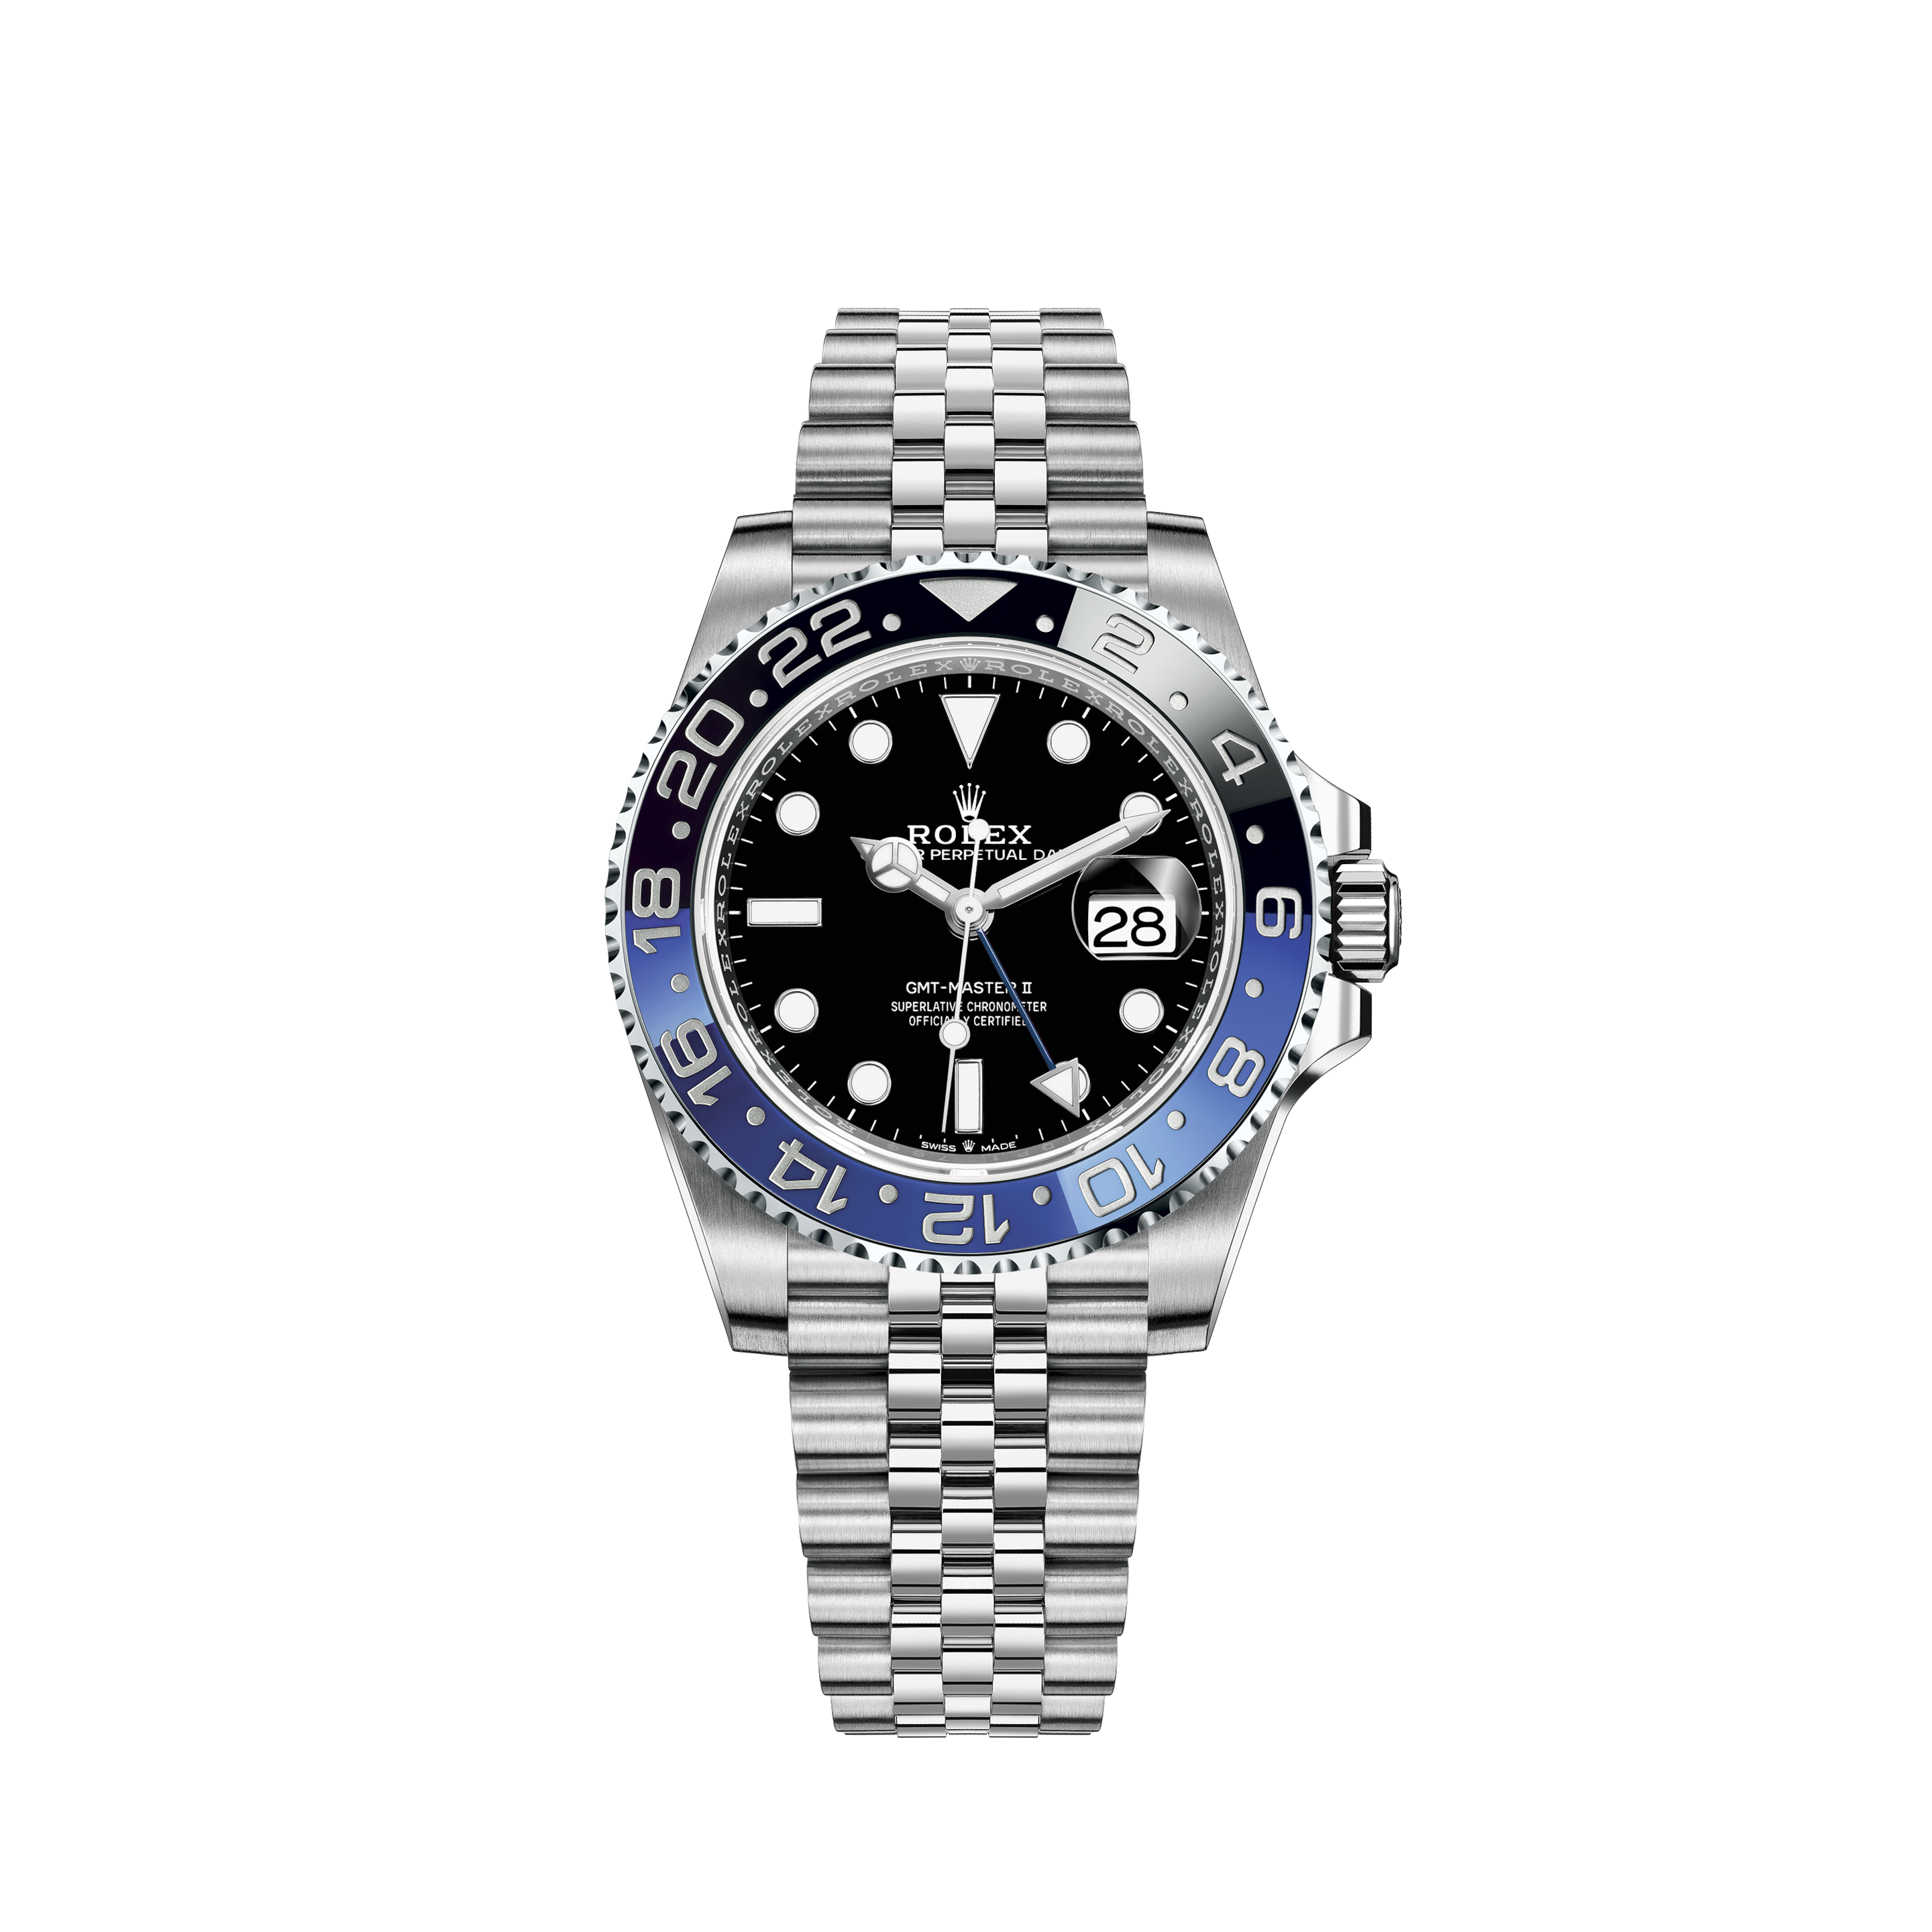 Rolex 1675 GMT-Master gilt dial from 1966